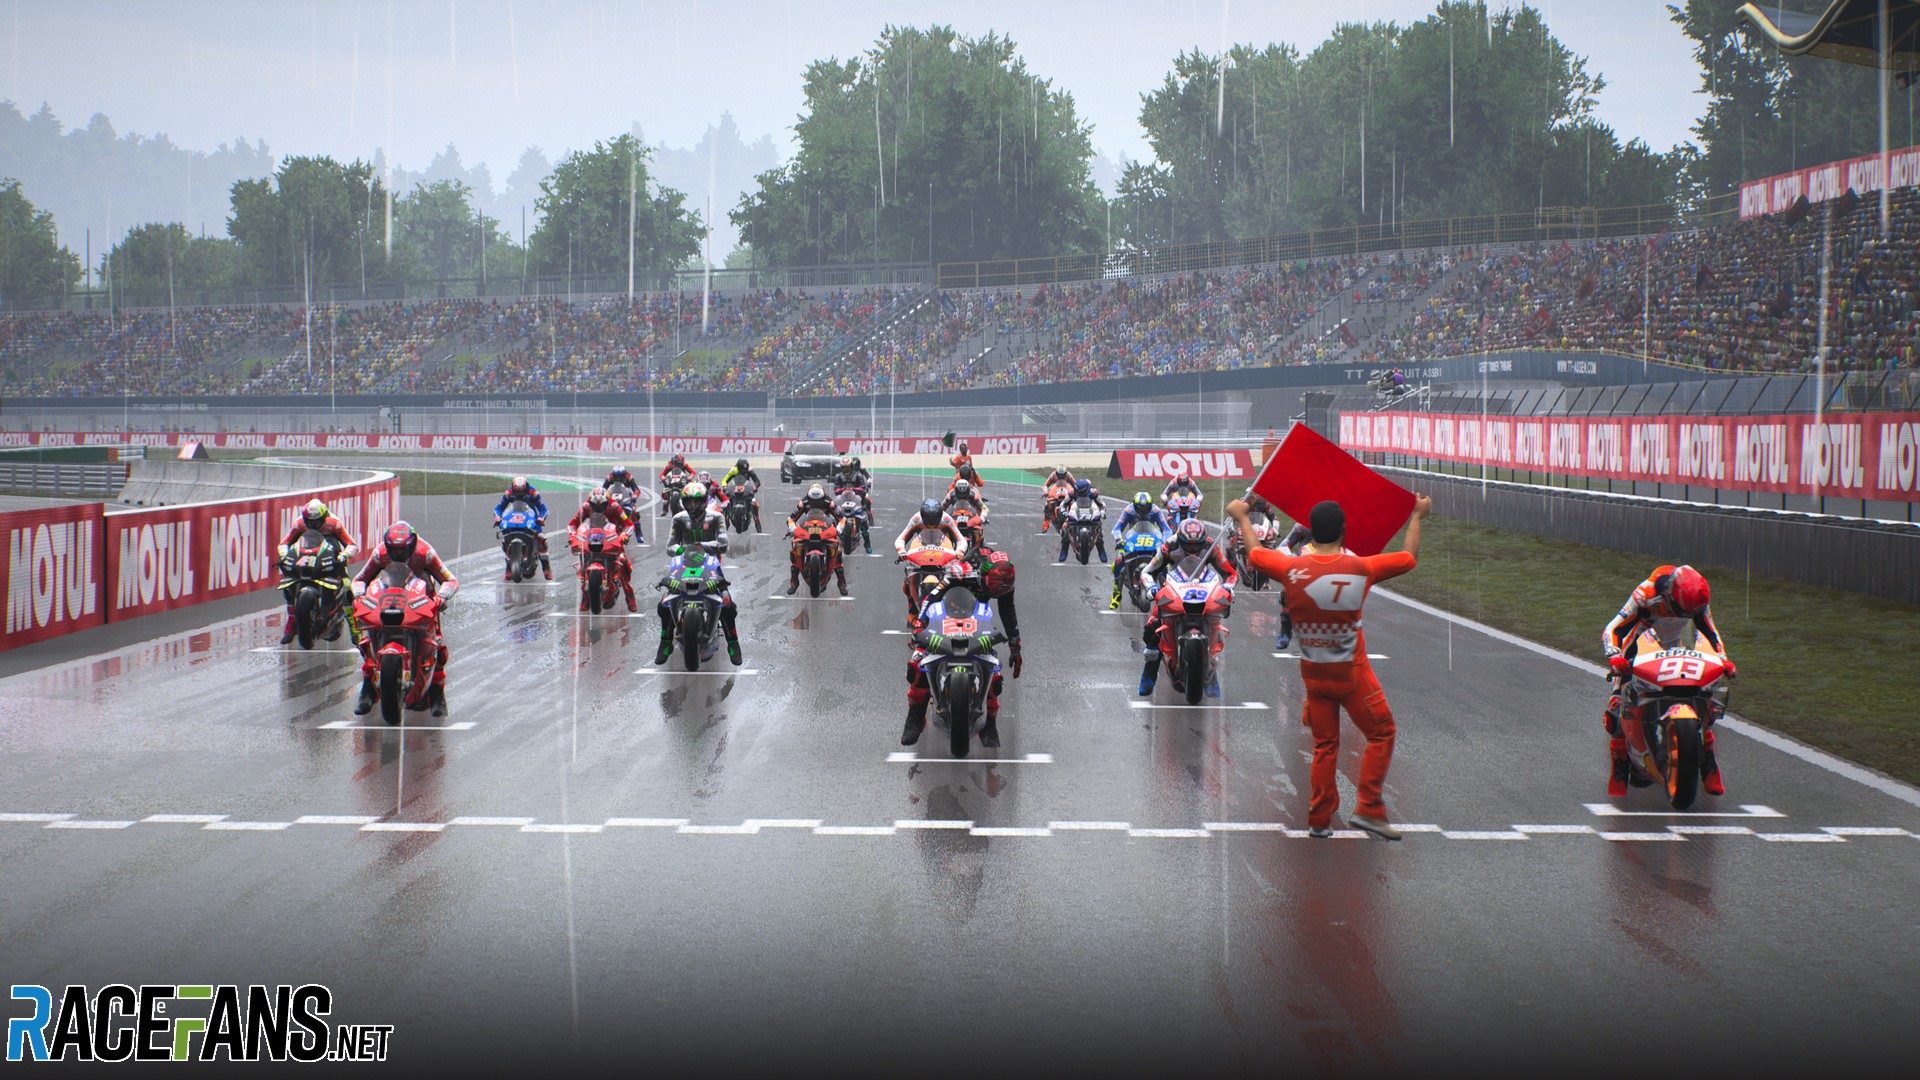 Moto GP 22": the official Moto GP game reviewed · RaceFans